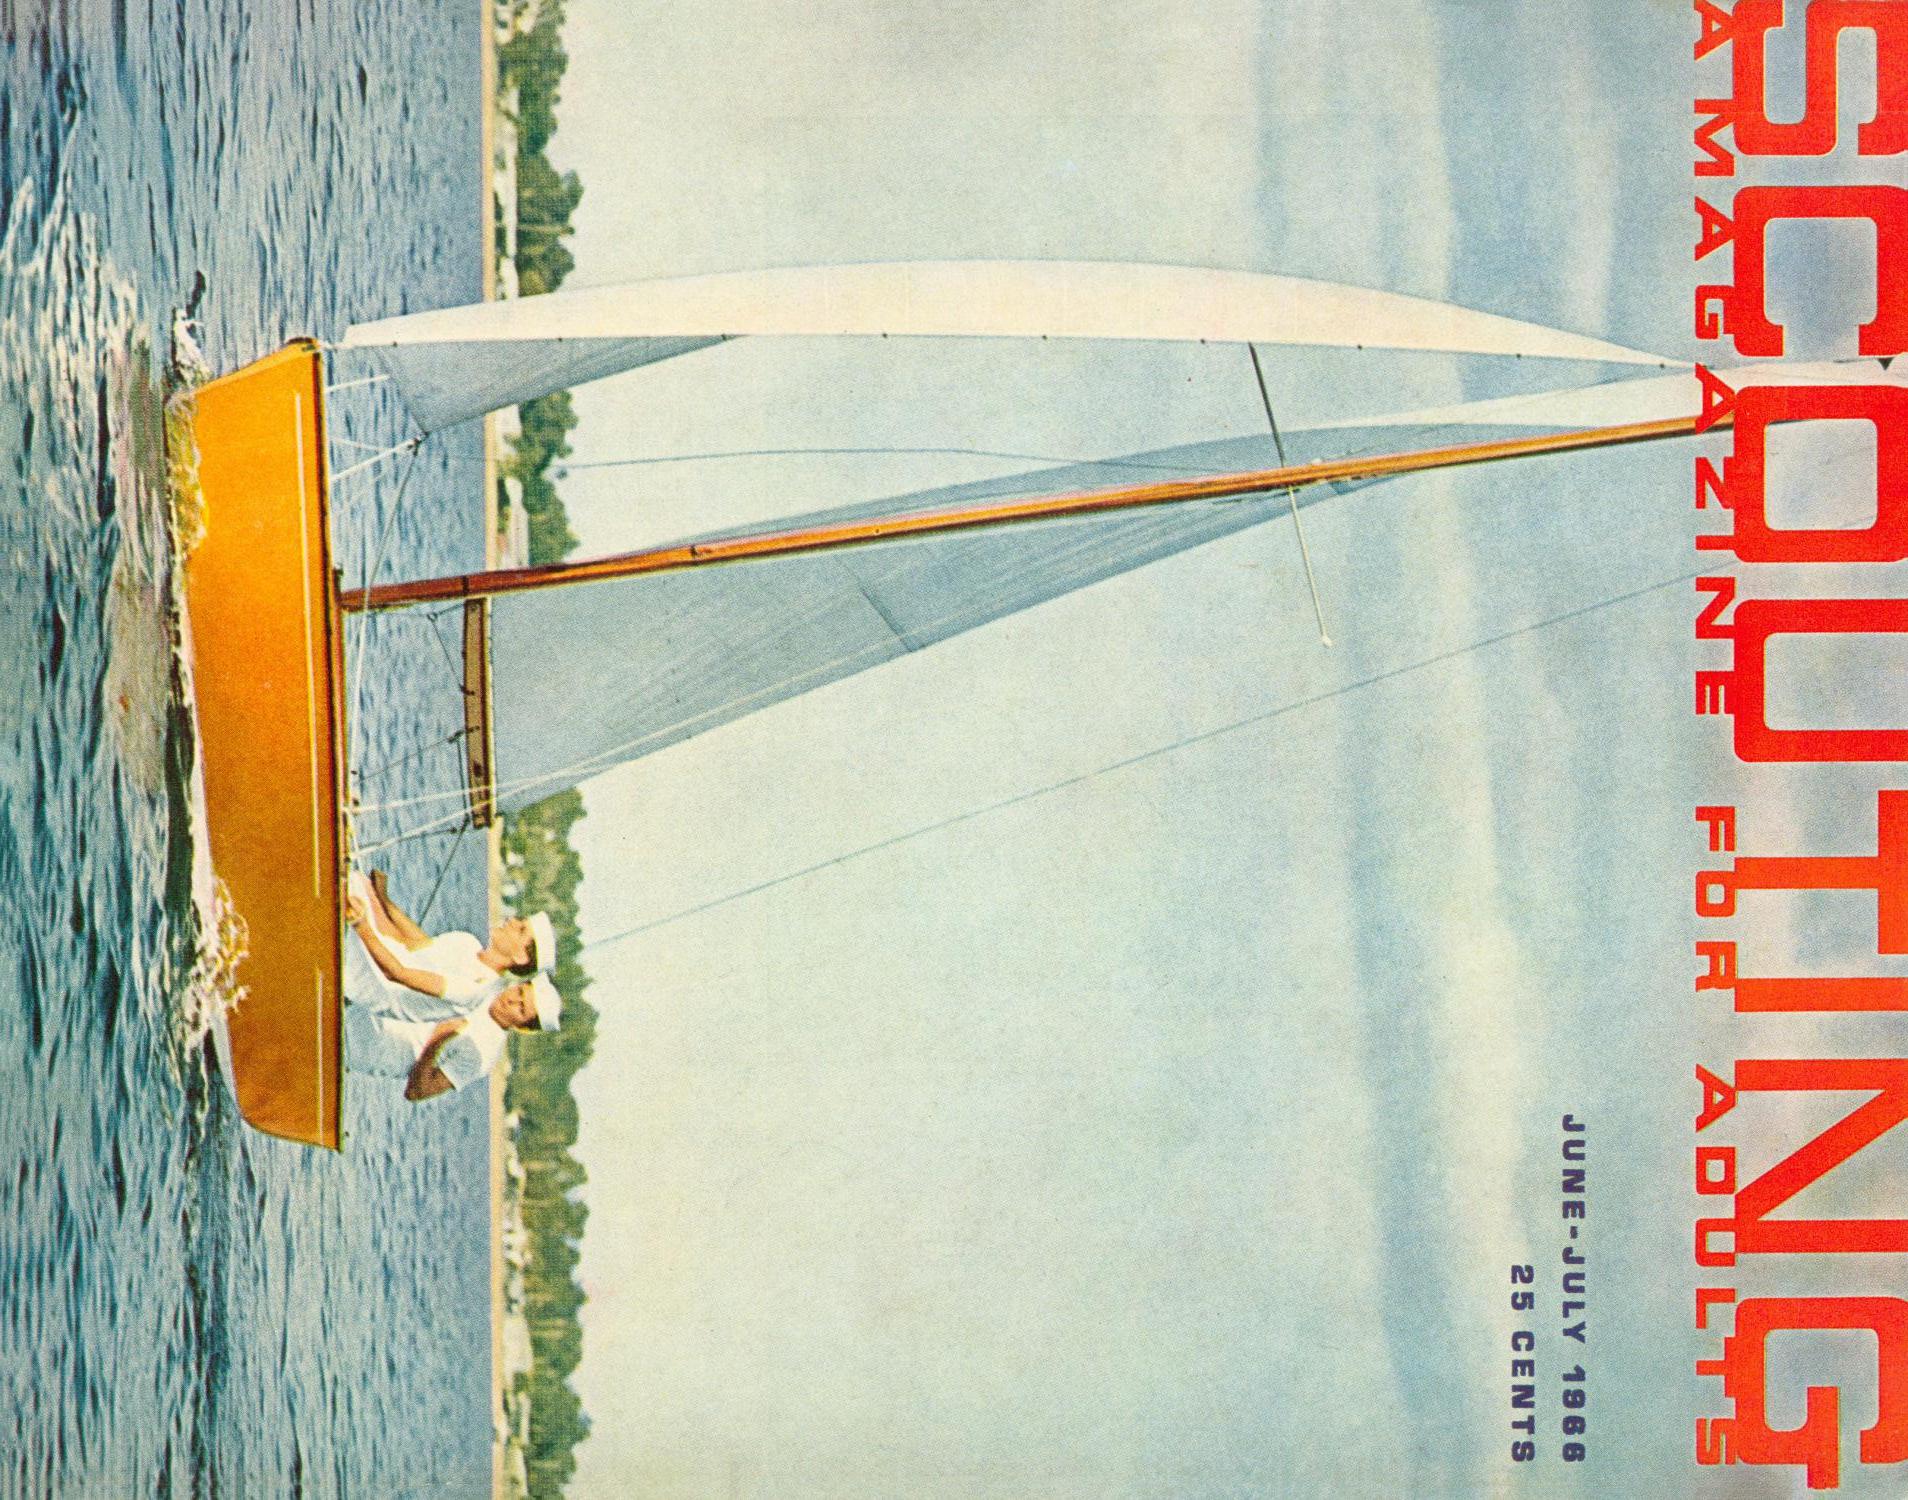 Scouting, Volume 54, Number 6, June-July 1966
                                                
                                                    Front Cover
                                                